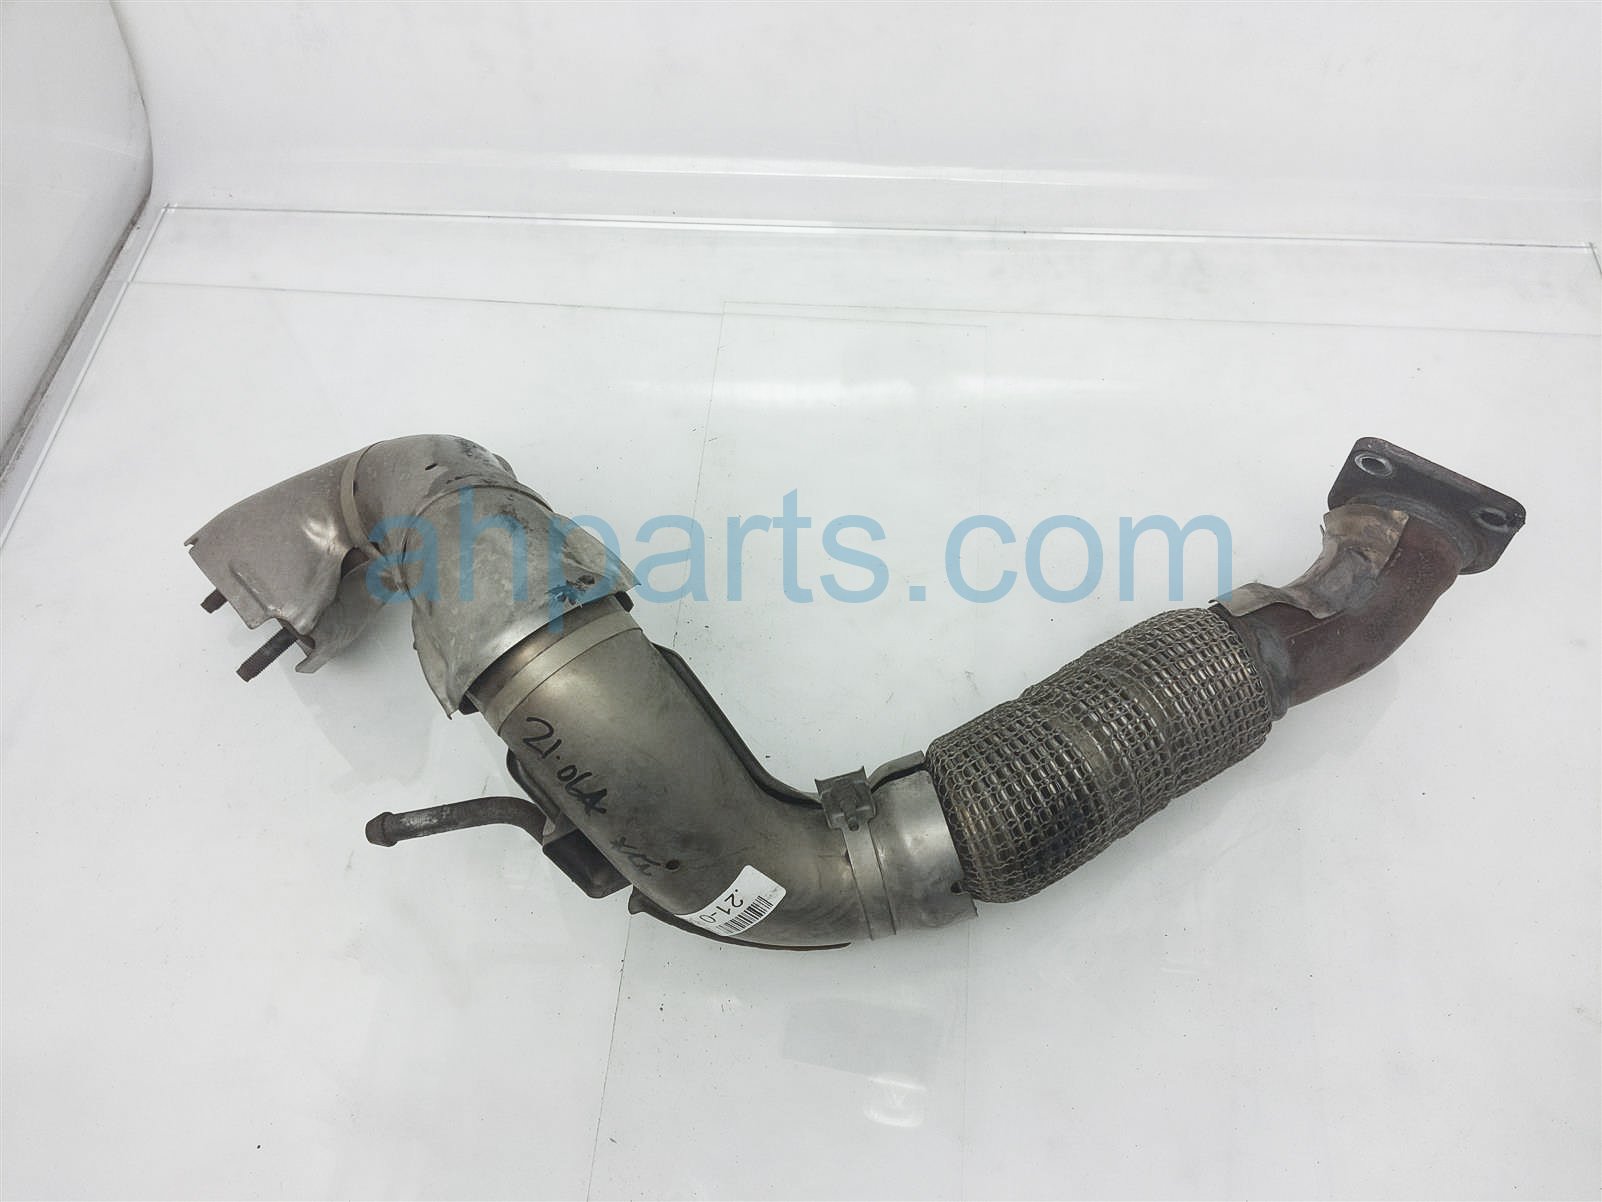 $100 Nissan FRONT EXHAUST PIPE ASSY